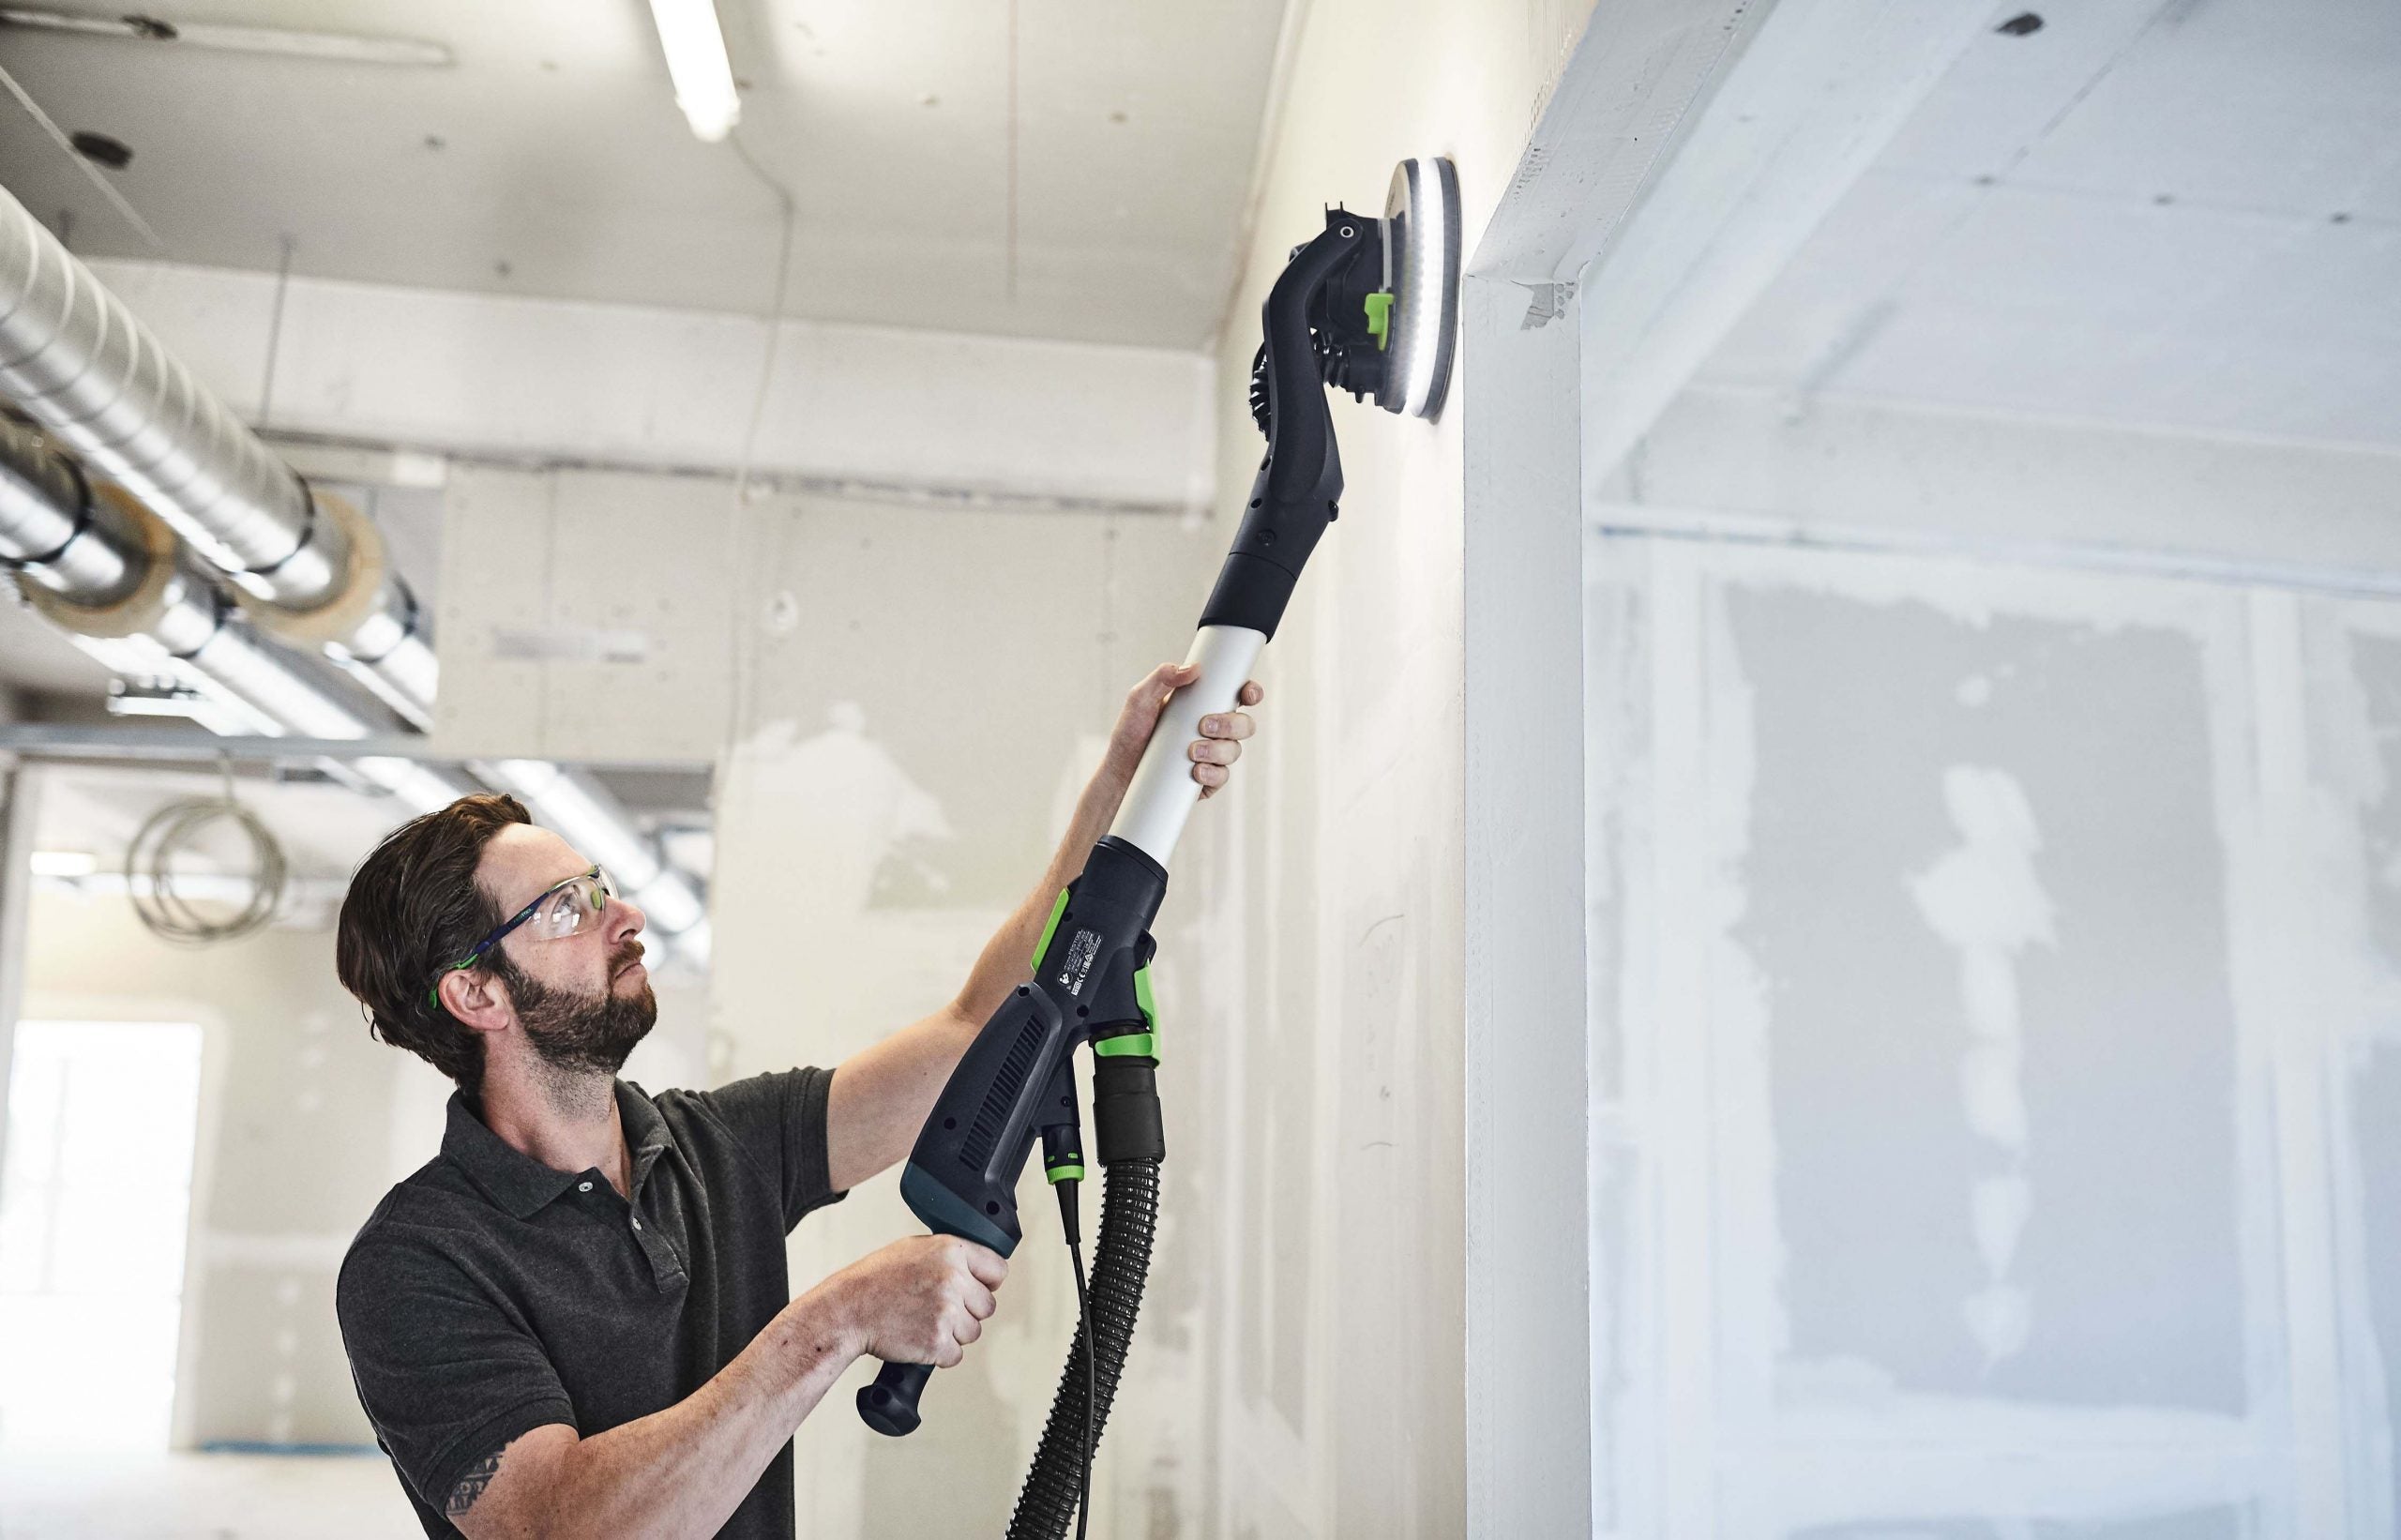 225mm Planex Drywall Long Reach Sander in Systainer LHS 2 225 PLANEX 575992 By Festool